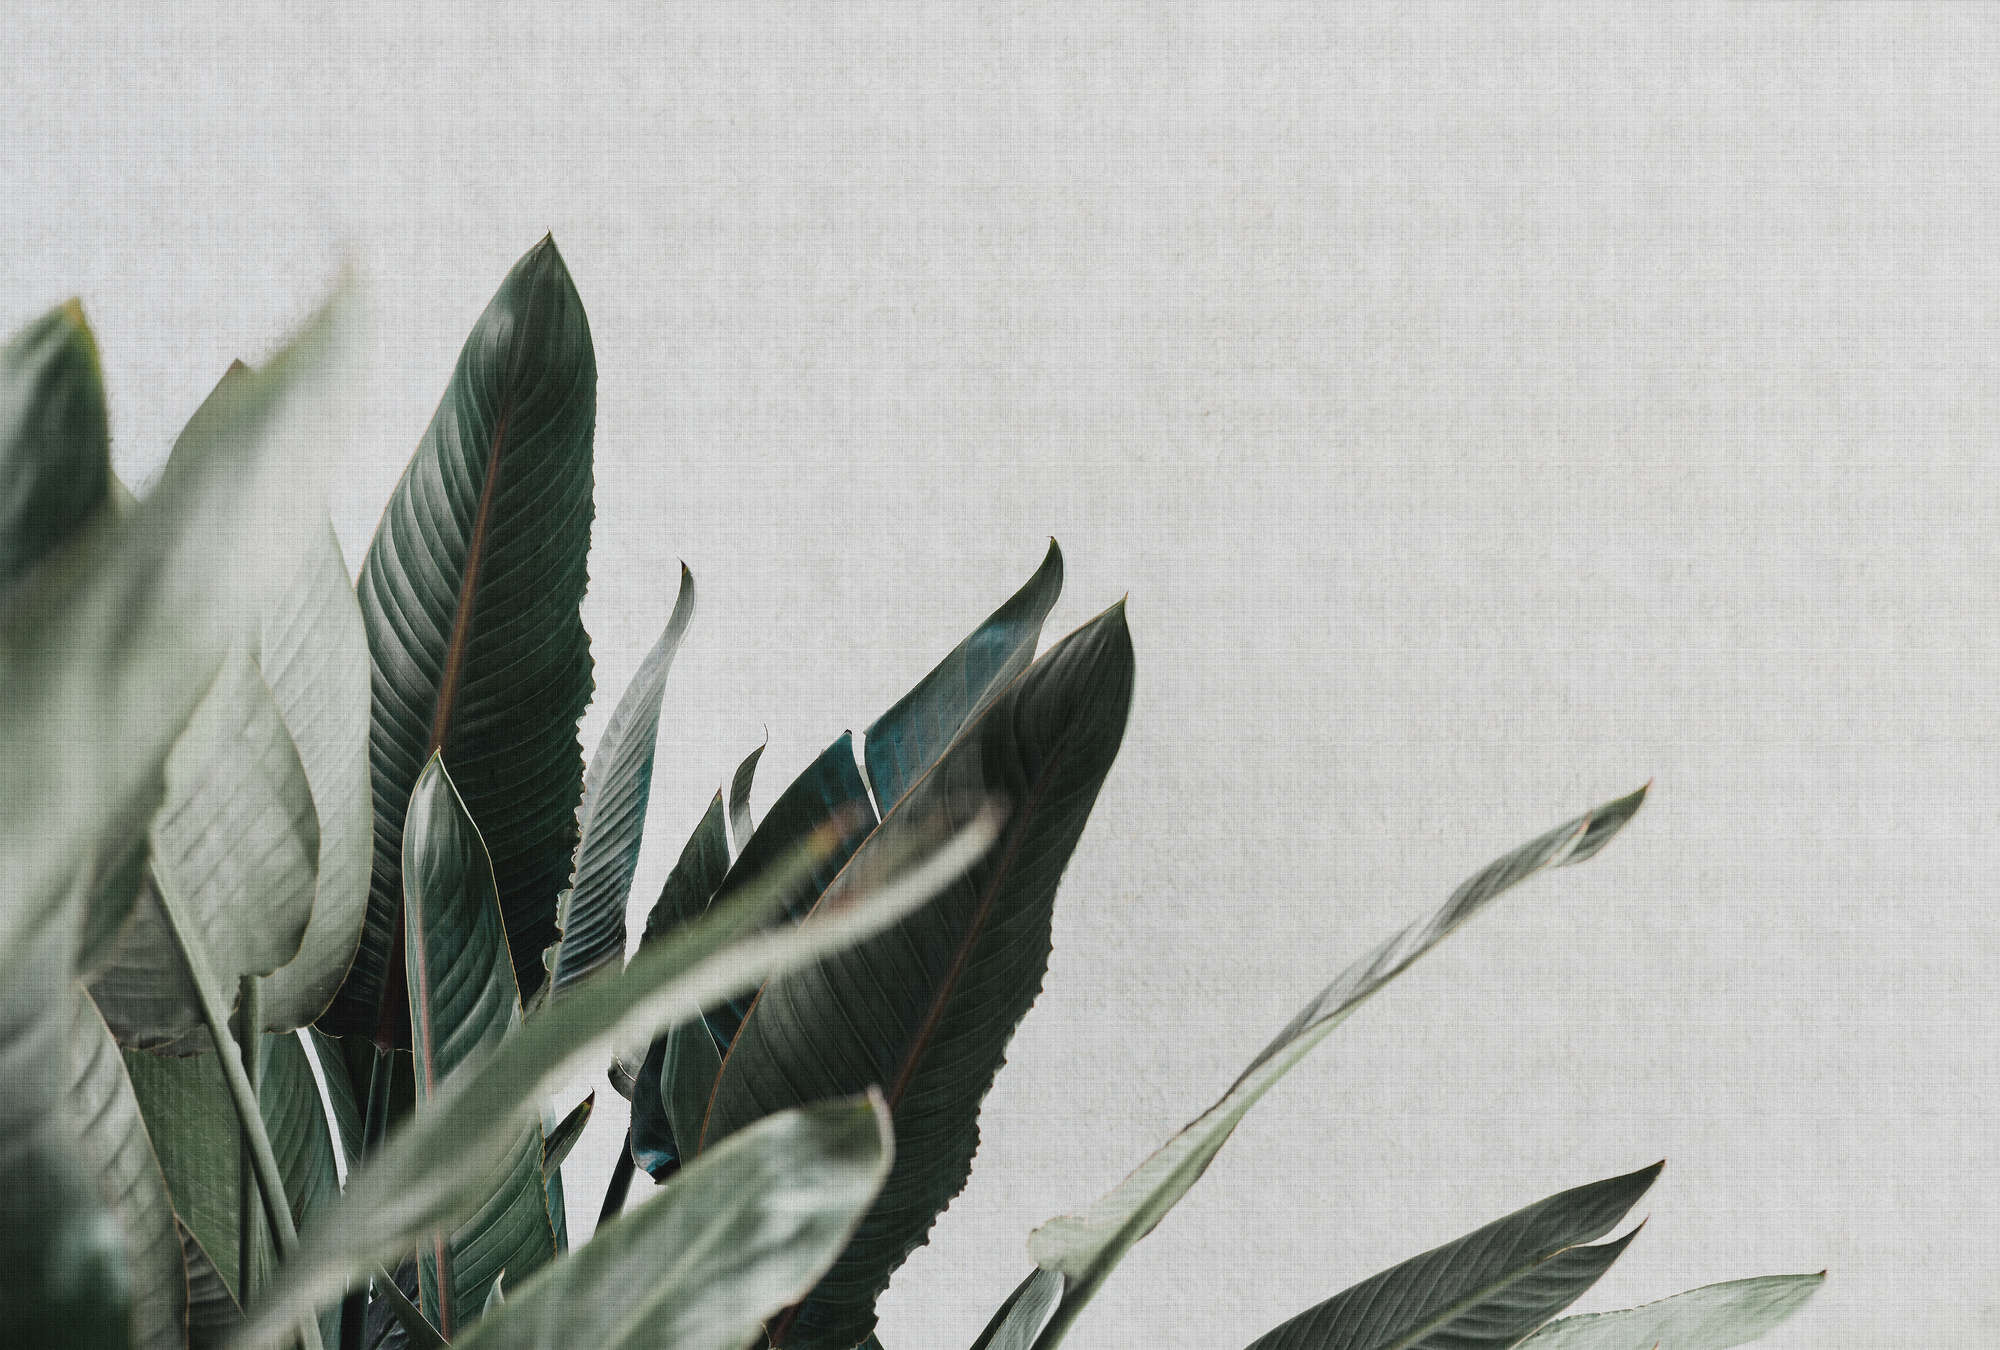             Urban jungle 1 - Photo wallpaper with palm leaves in natural linen structure - grey, green | mother-of-pearl smooth fleece
        